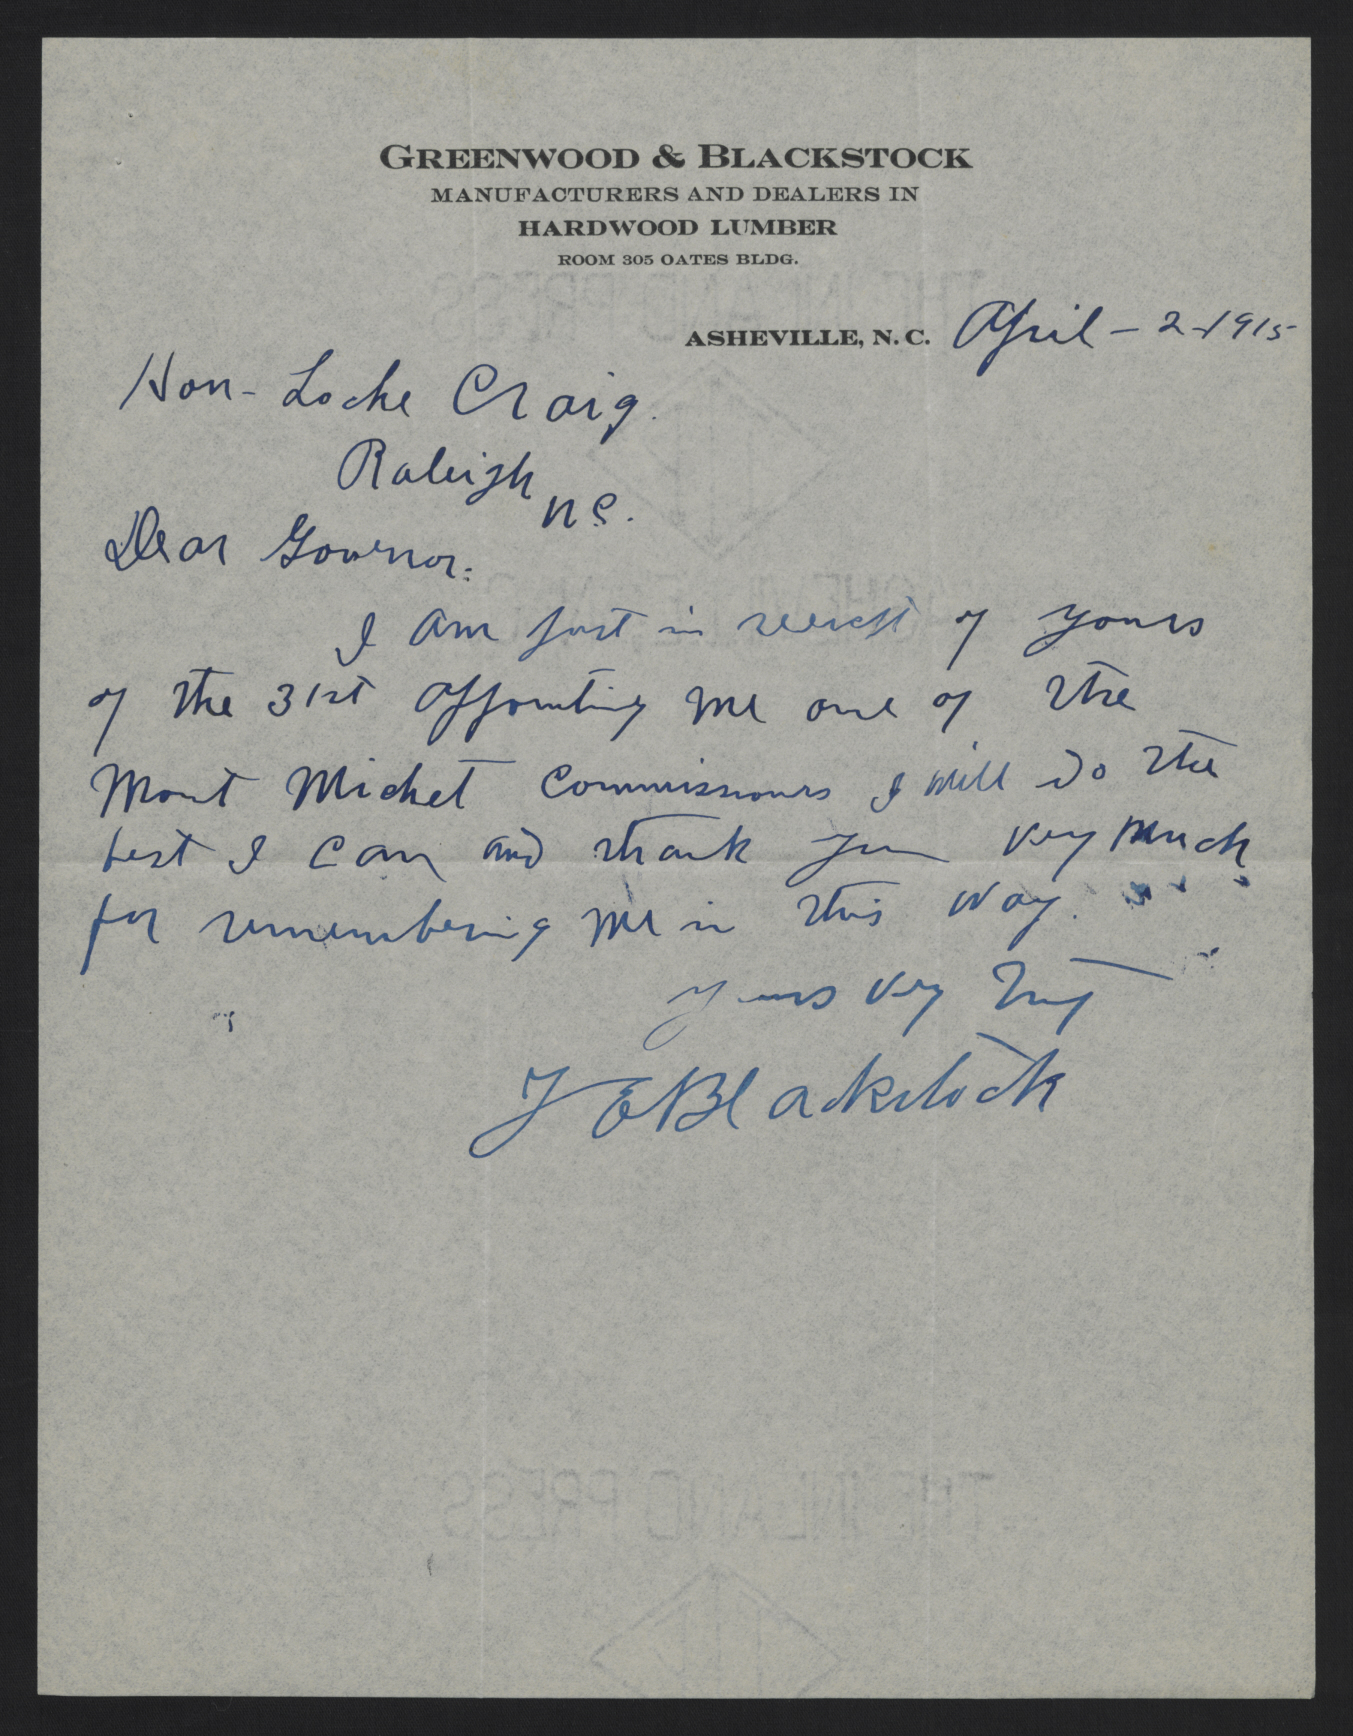 Letter from Blackstock to Craig, April 2, 1915